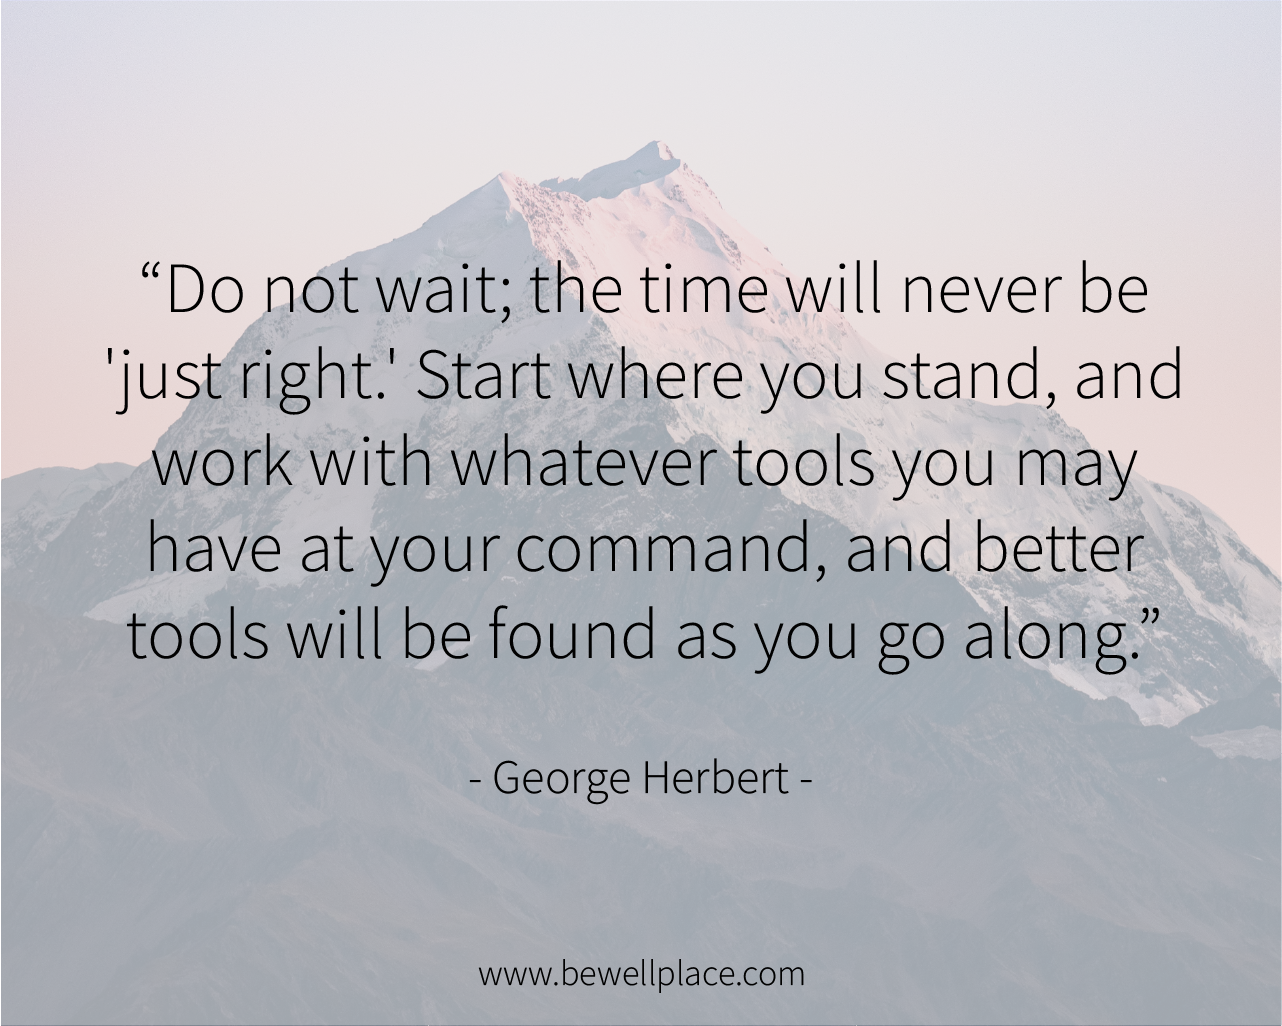 Do not wait; the time will never be 'just right.' Start where you stand, and work with whatever tools you may have at your command, and better tools will be found as you go along. - George Herbert